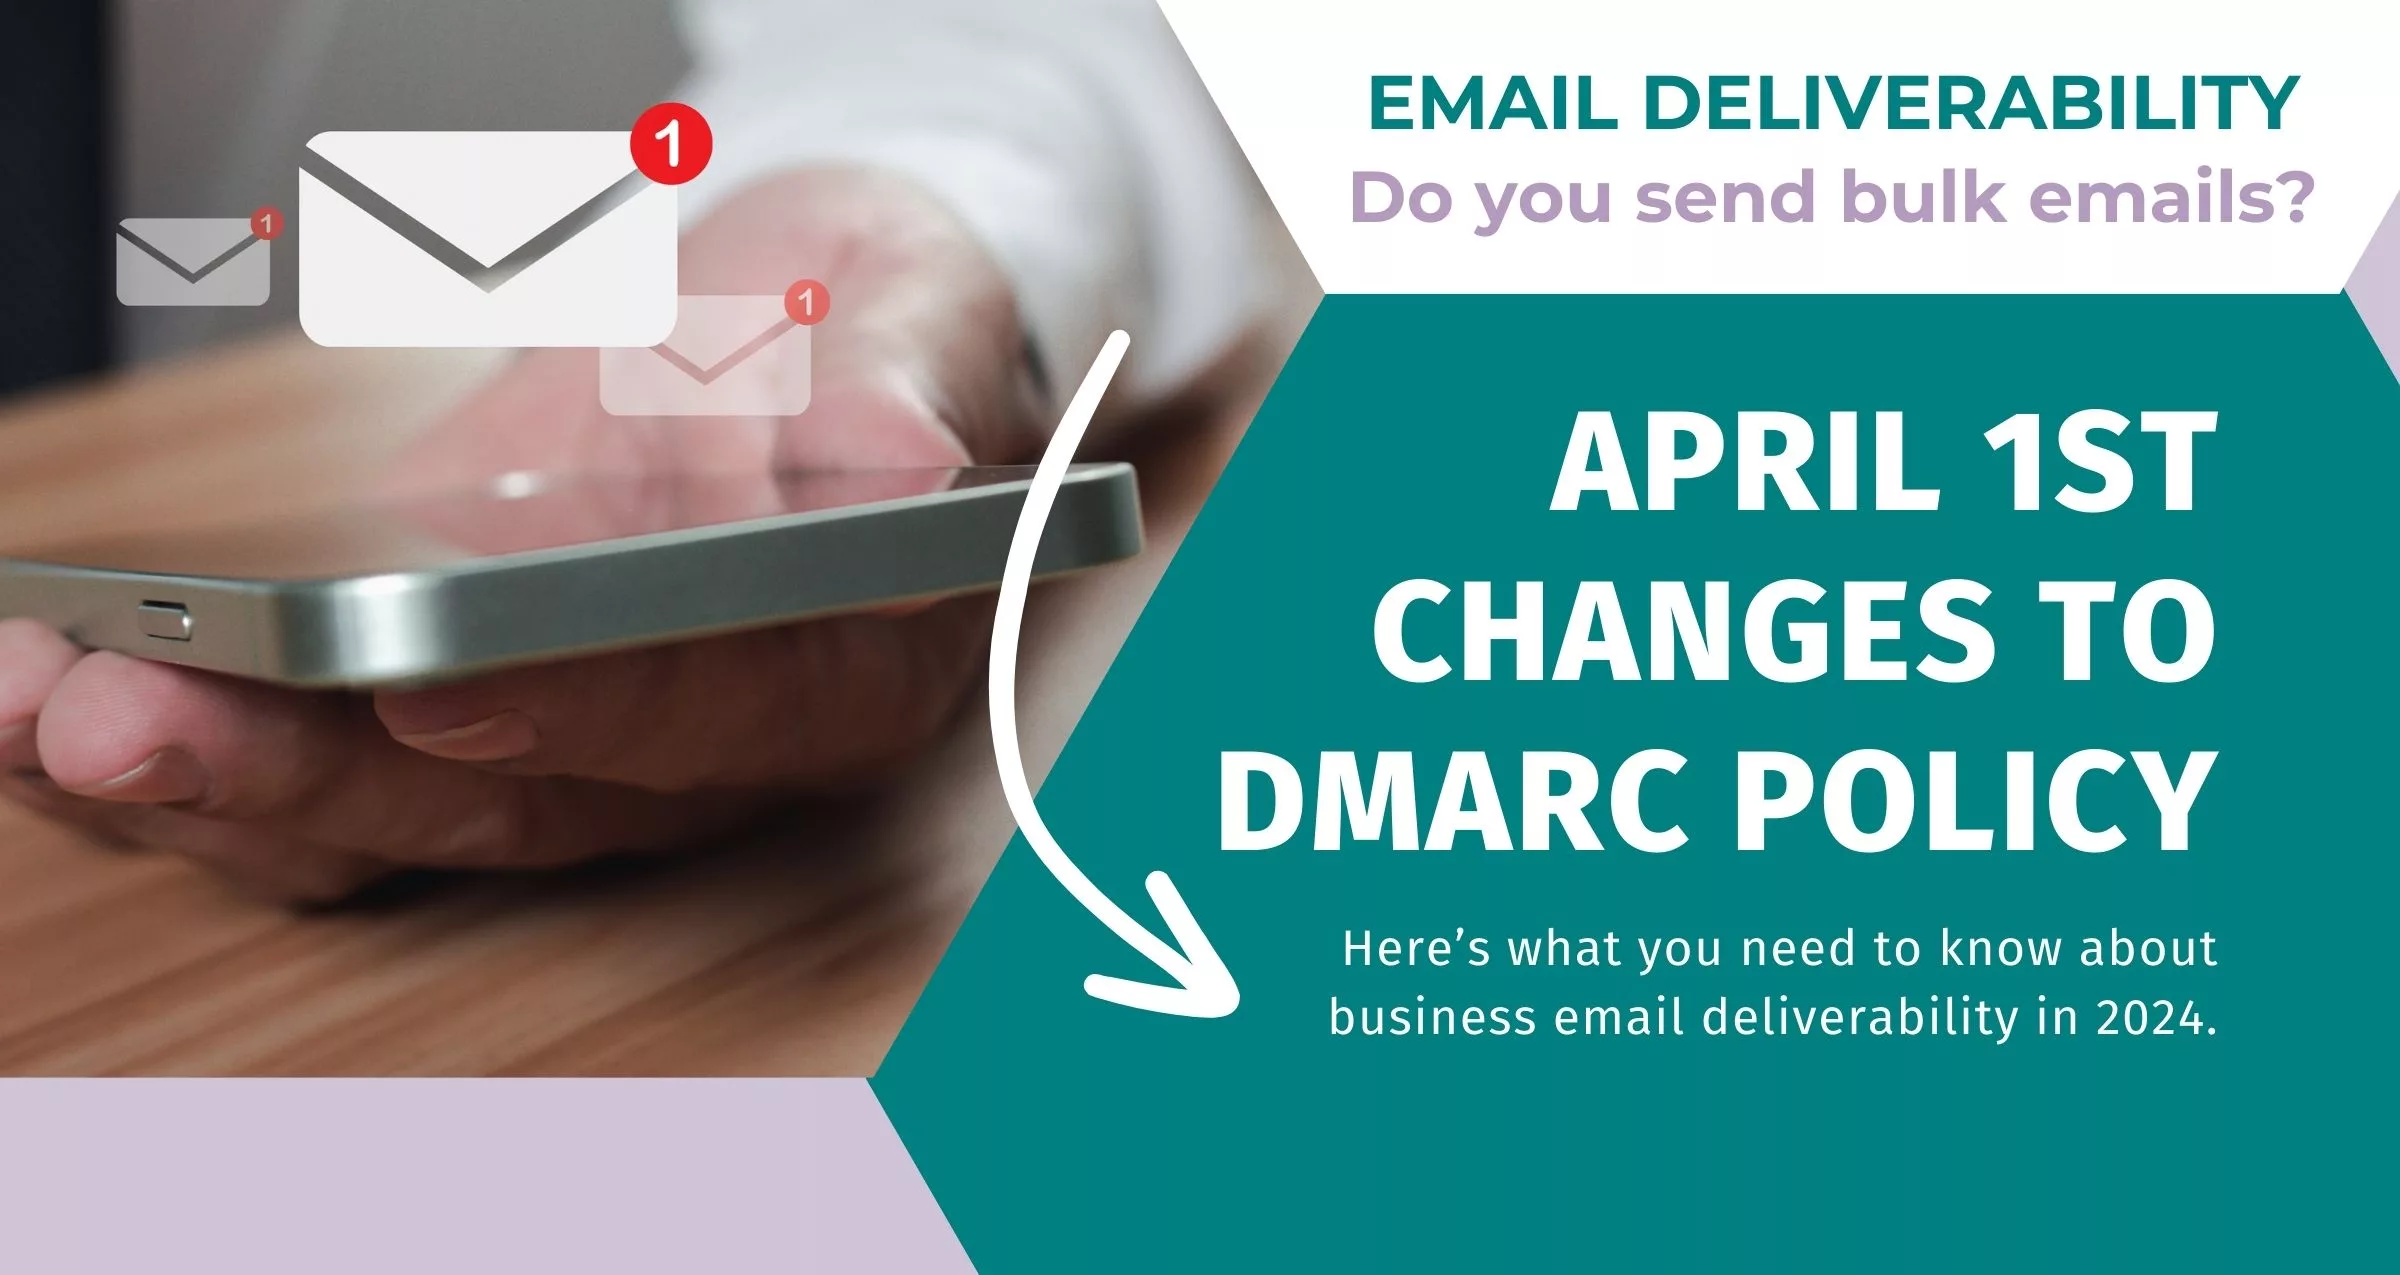 Dmarc policy changes info graphic for blog post